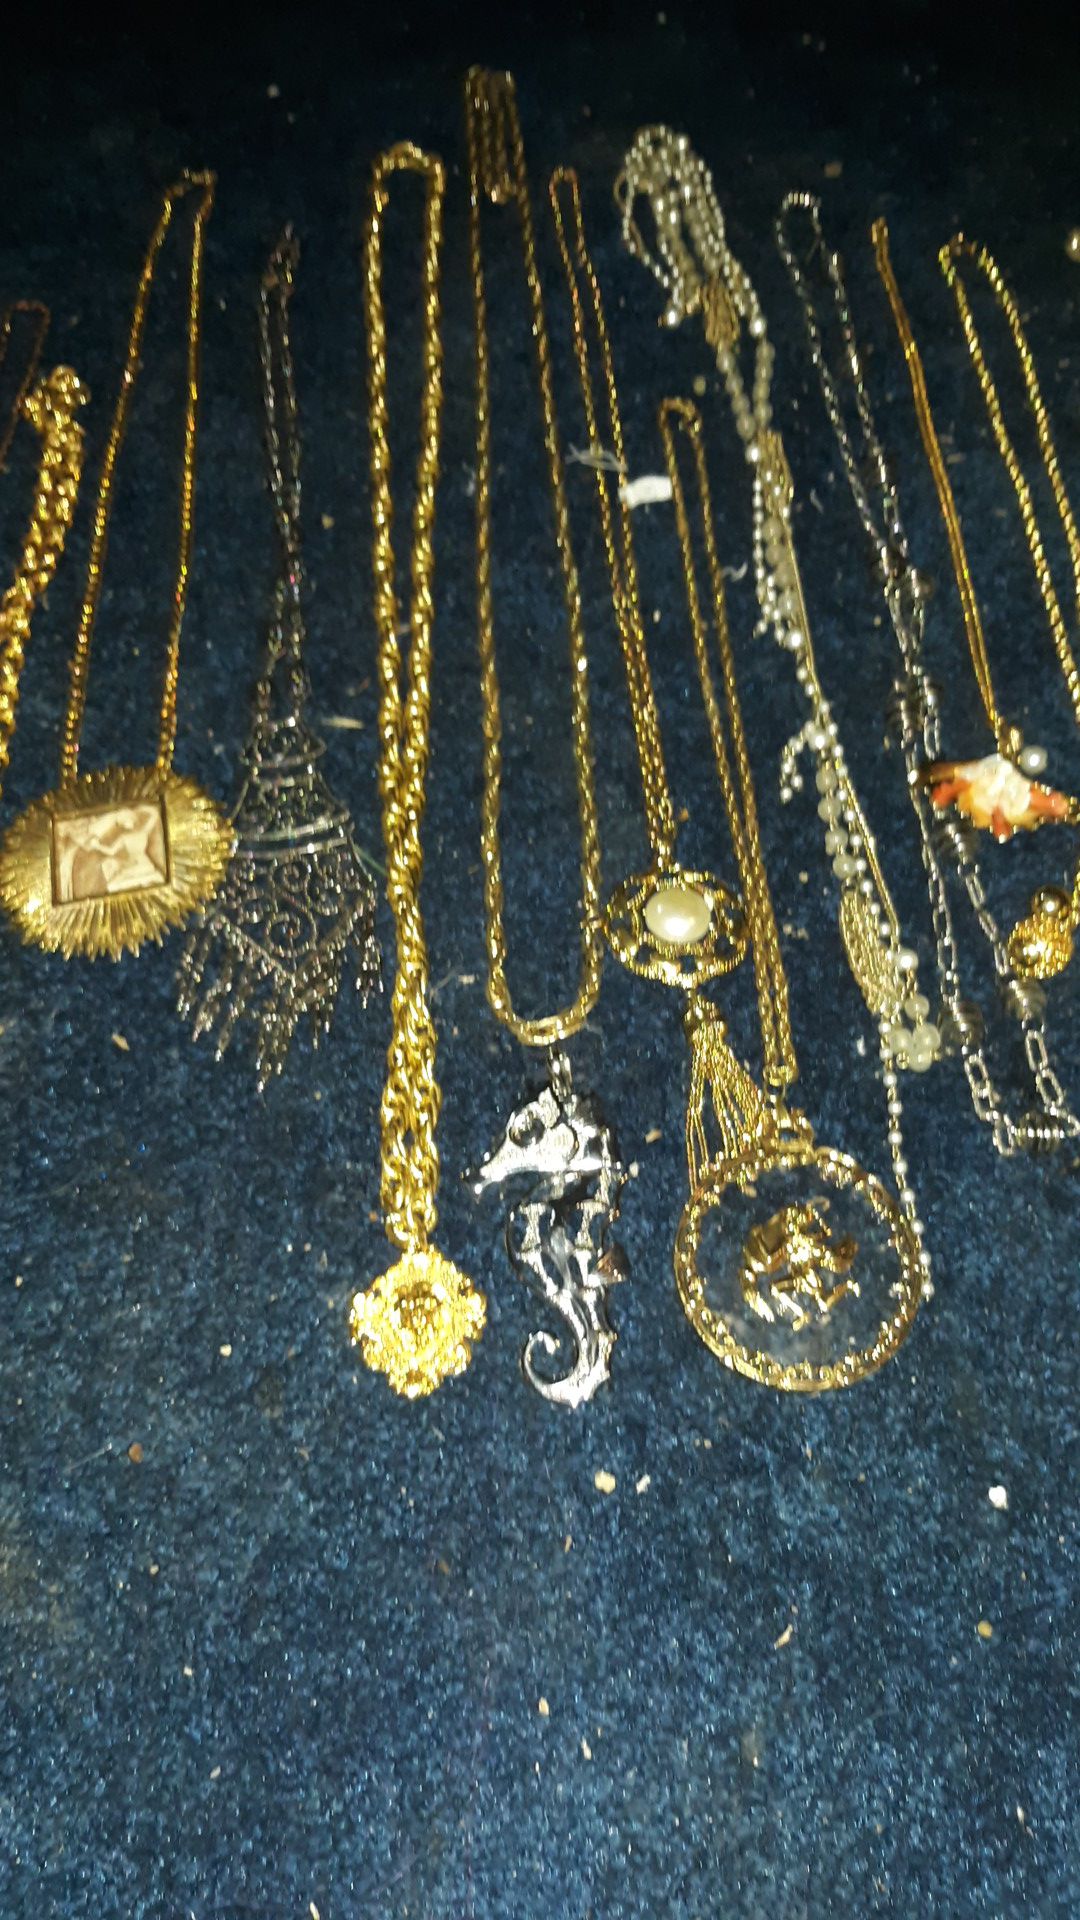 Vintage costume jewerly some expensive necklace not 14k. Take all 80$